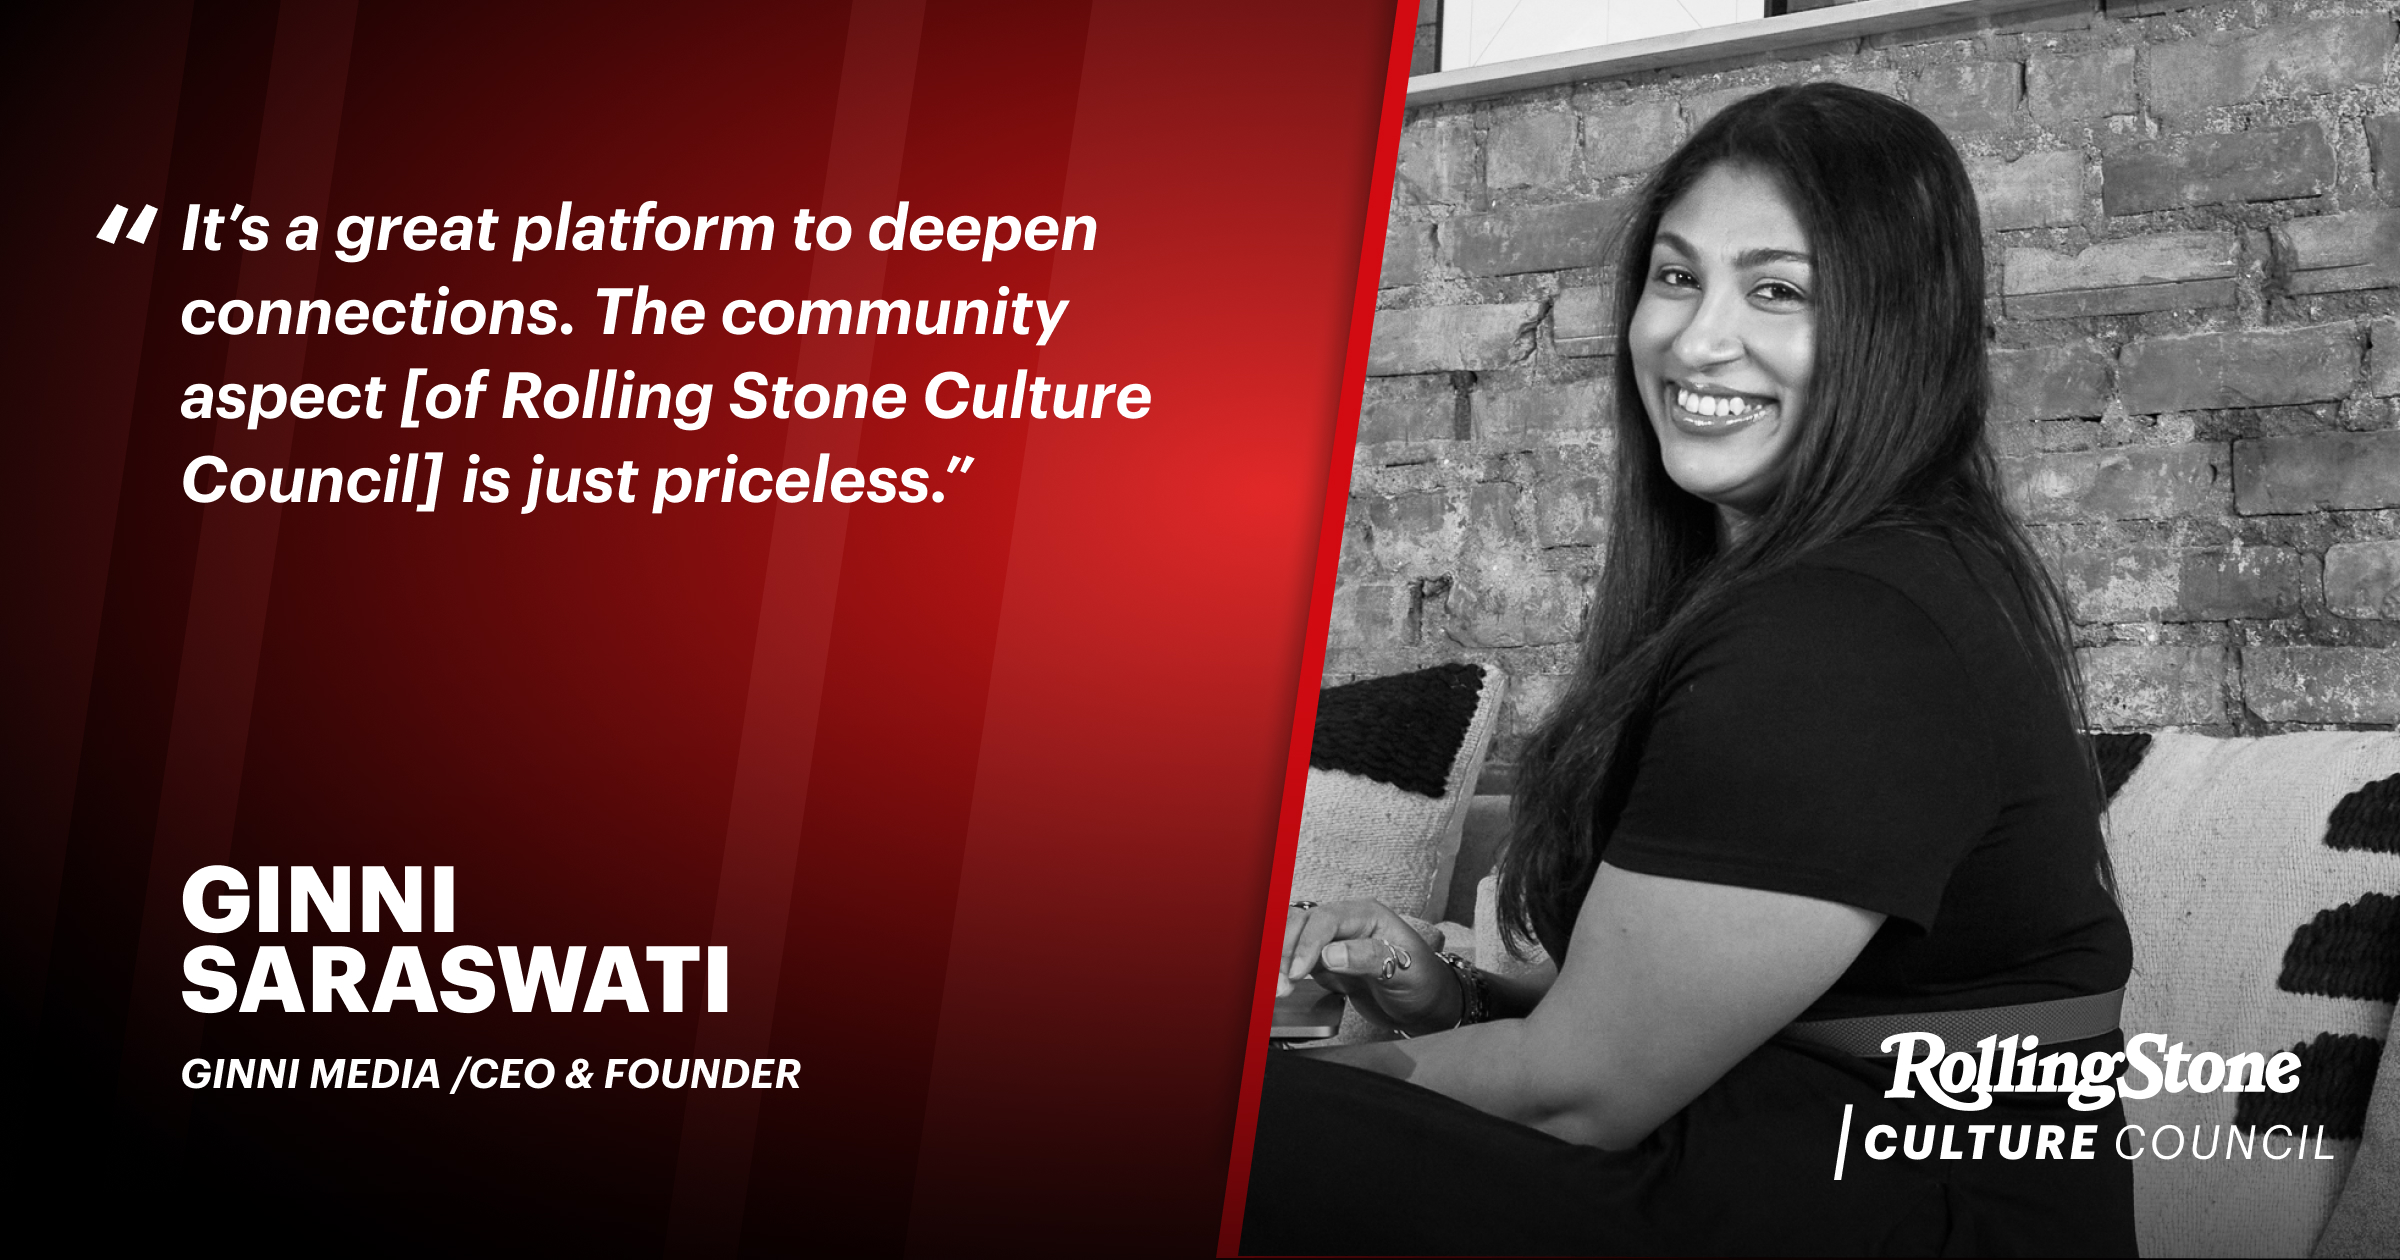 Through Rolling Stone Culture Council, Ginni Saraswati Increases Credibility and Builds Priceless Relationships